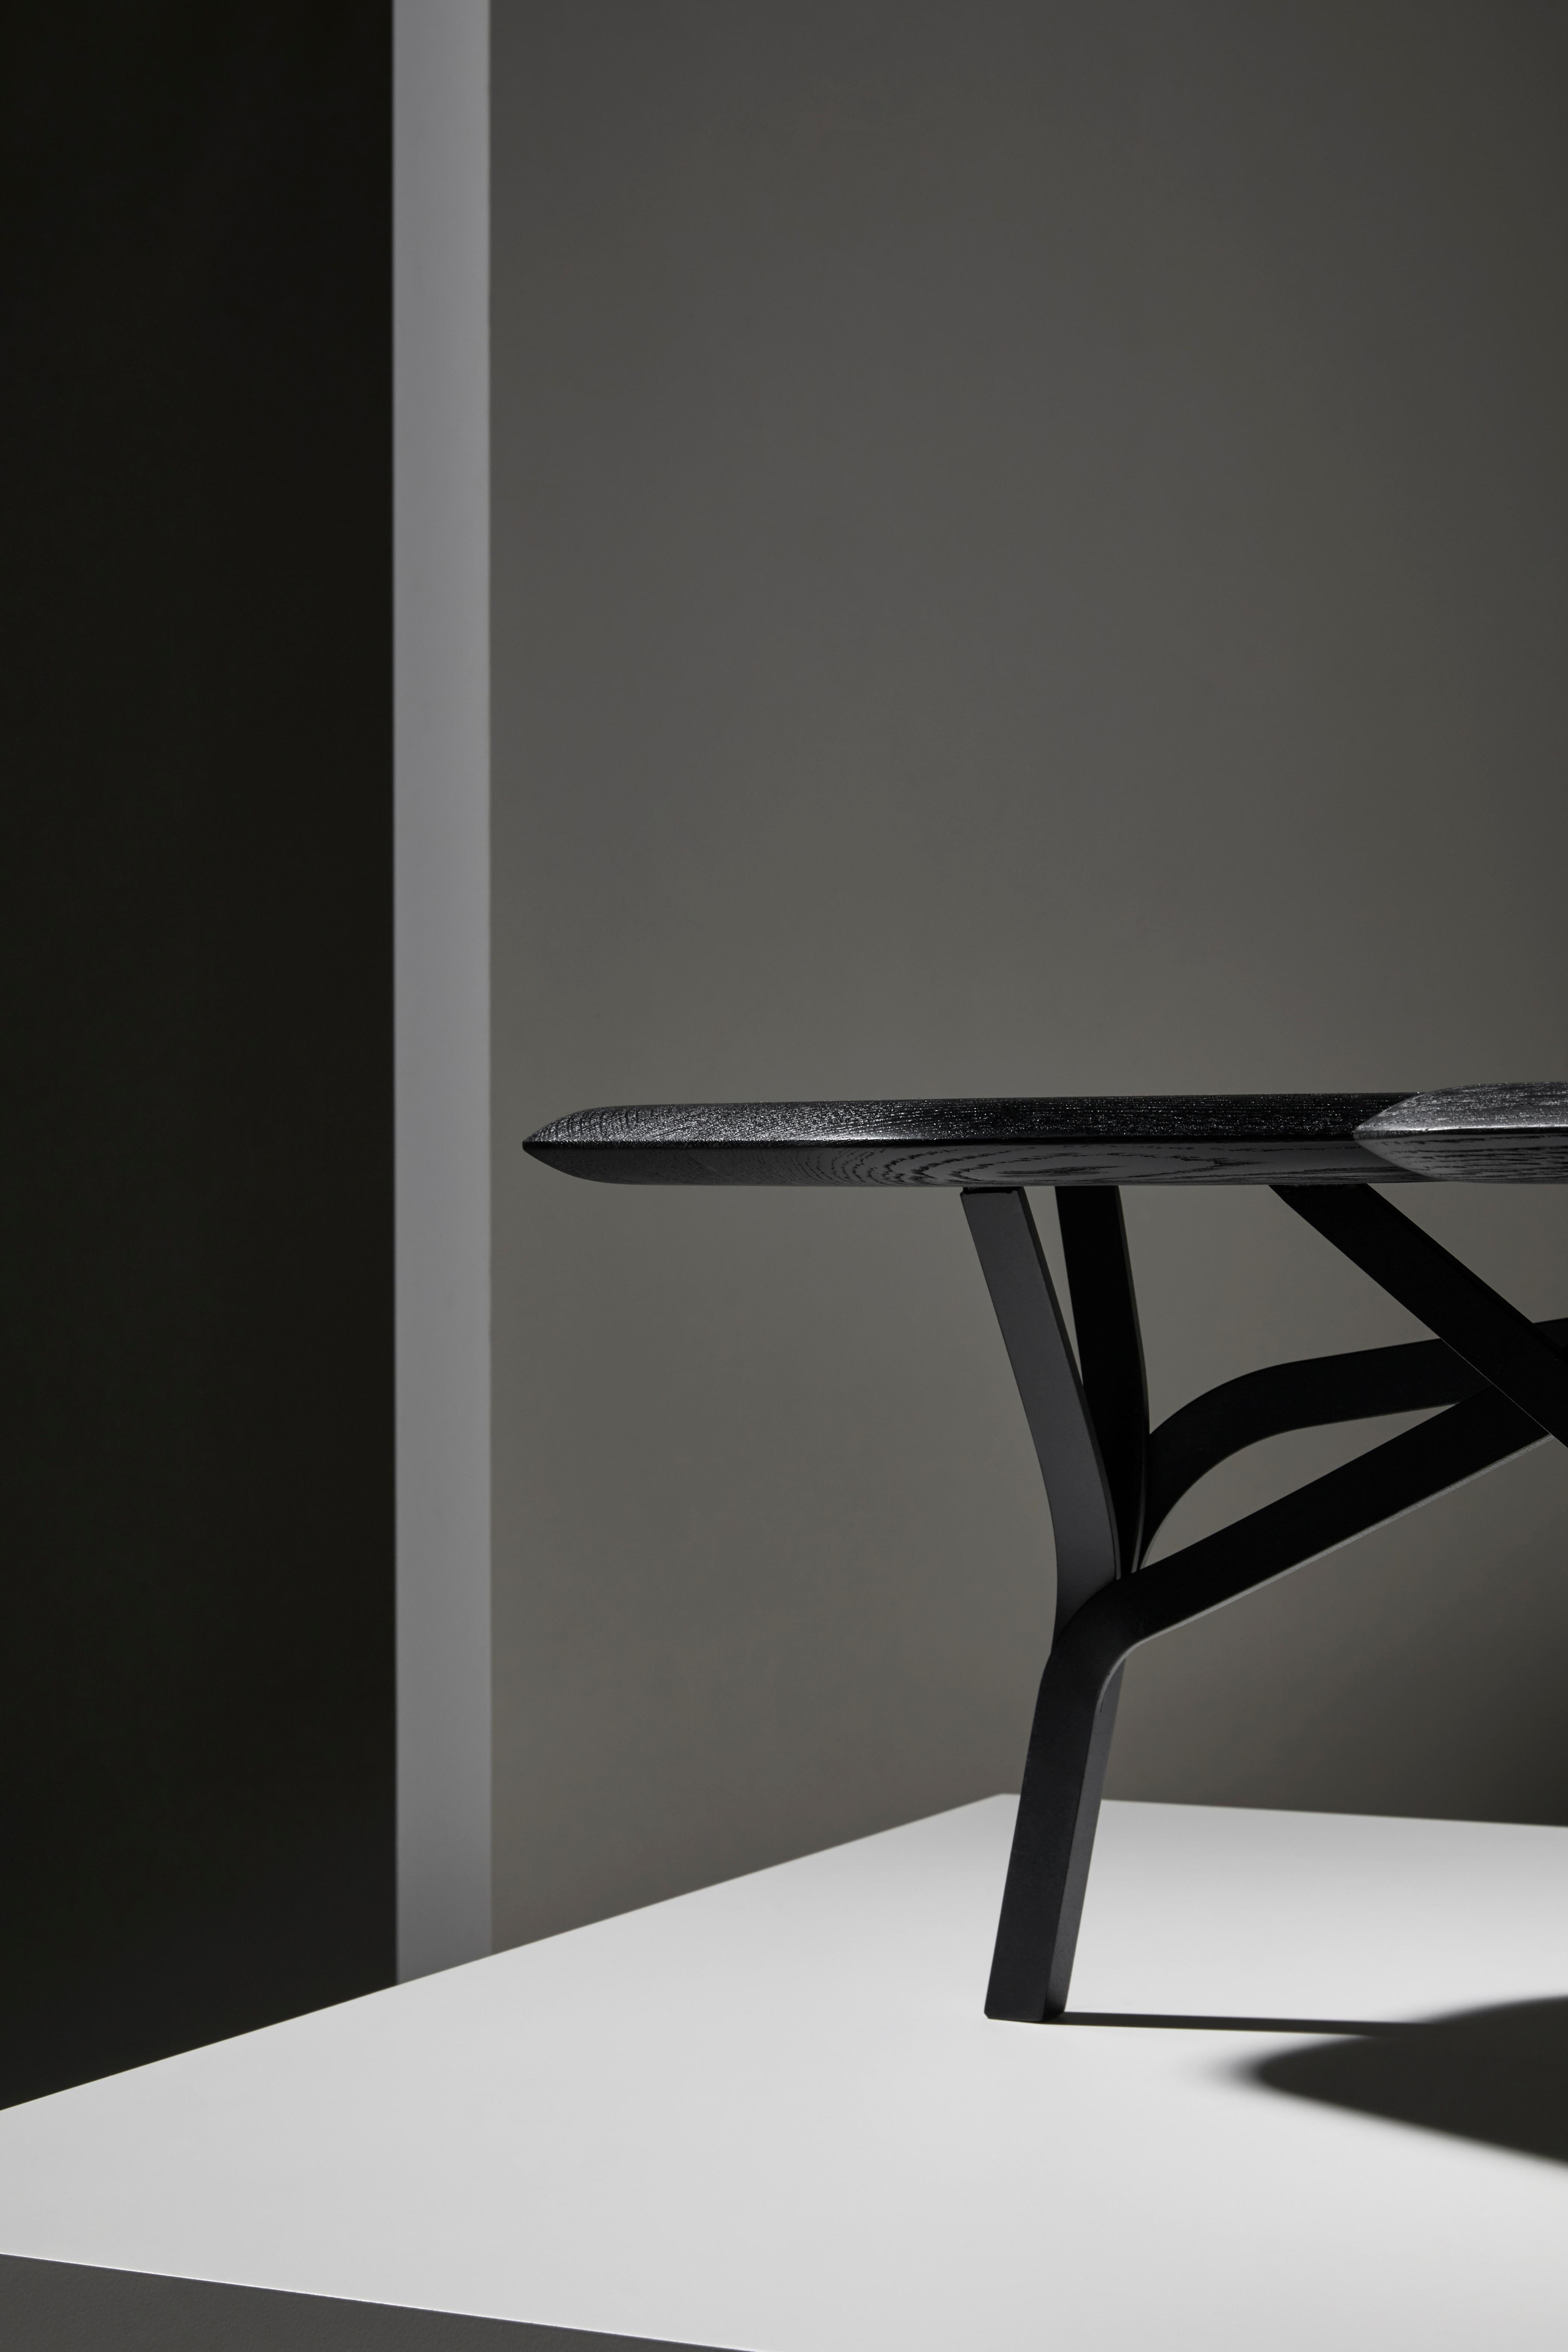 French Borghese Coffee Table, Black Wood Top by Noé Duchaufour Lawrance for La Chance For Sale